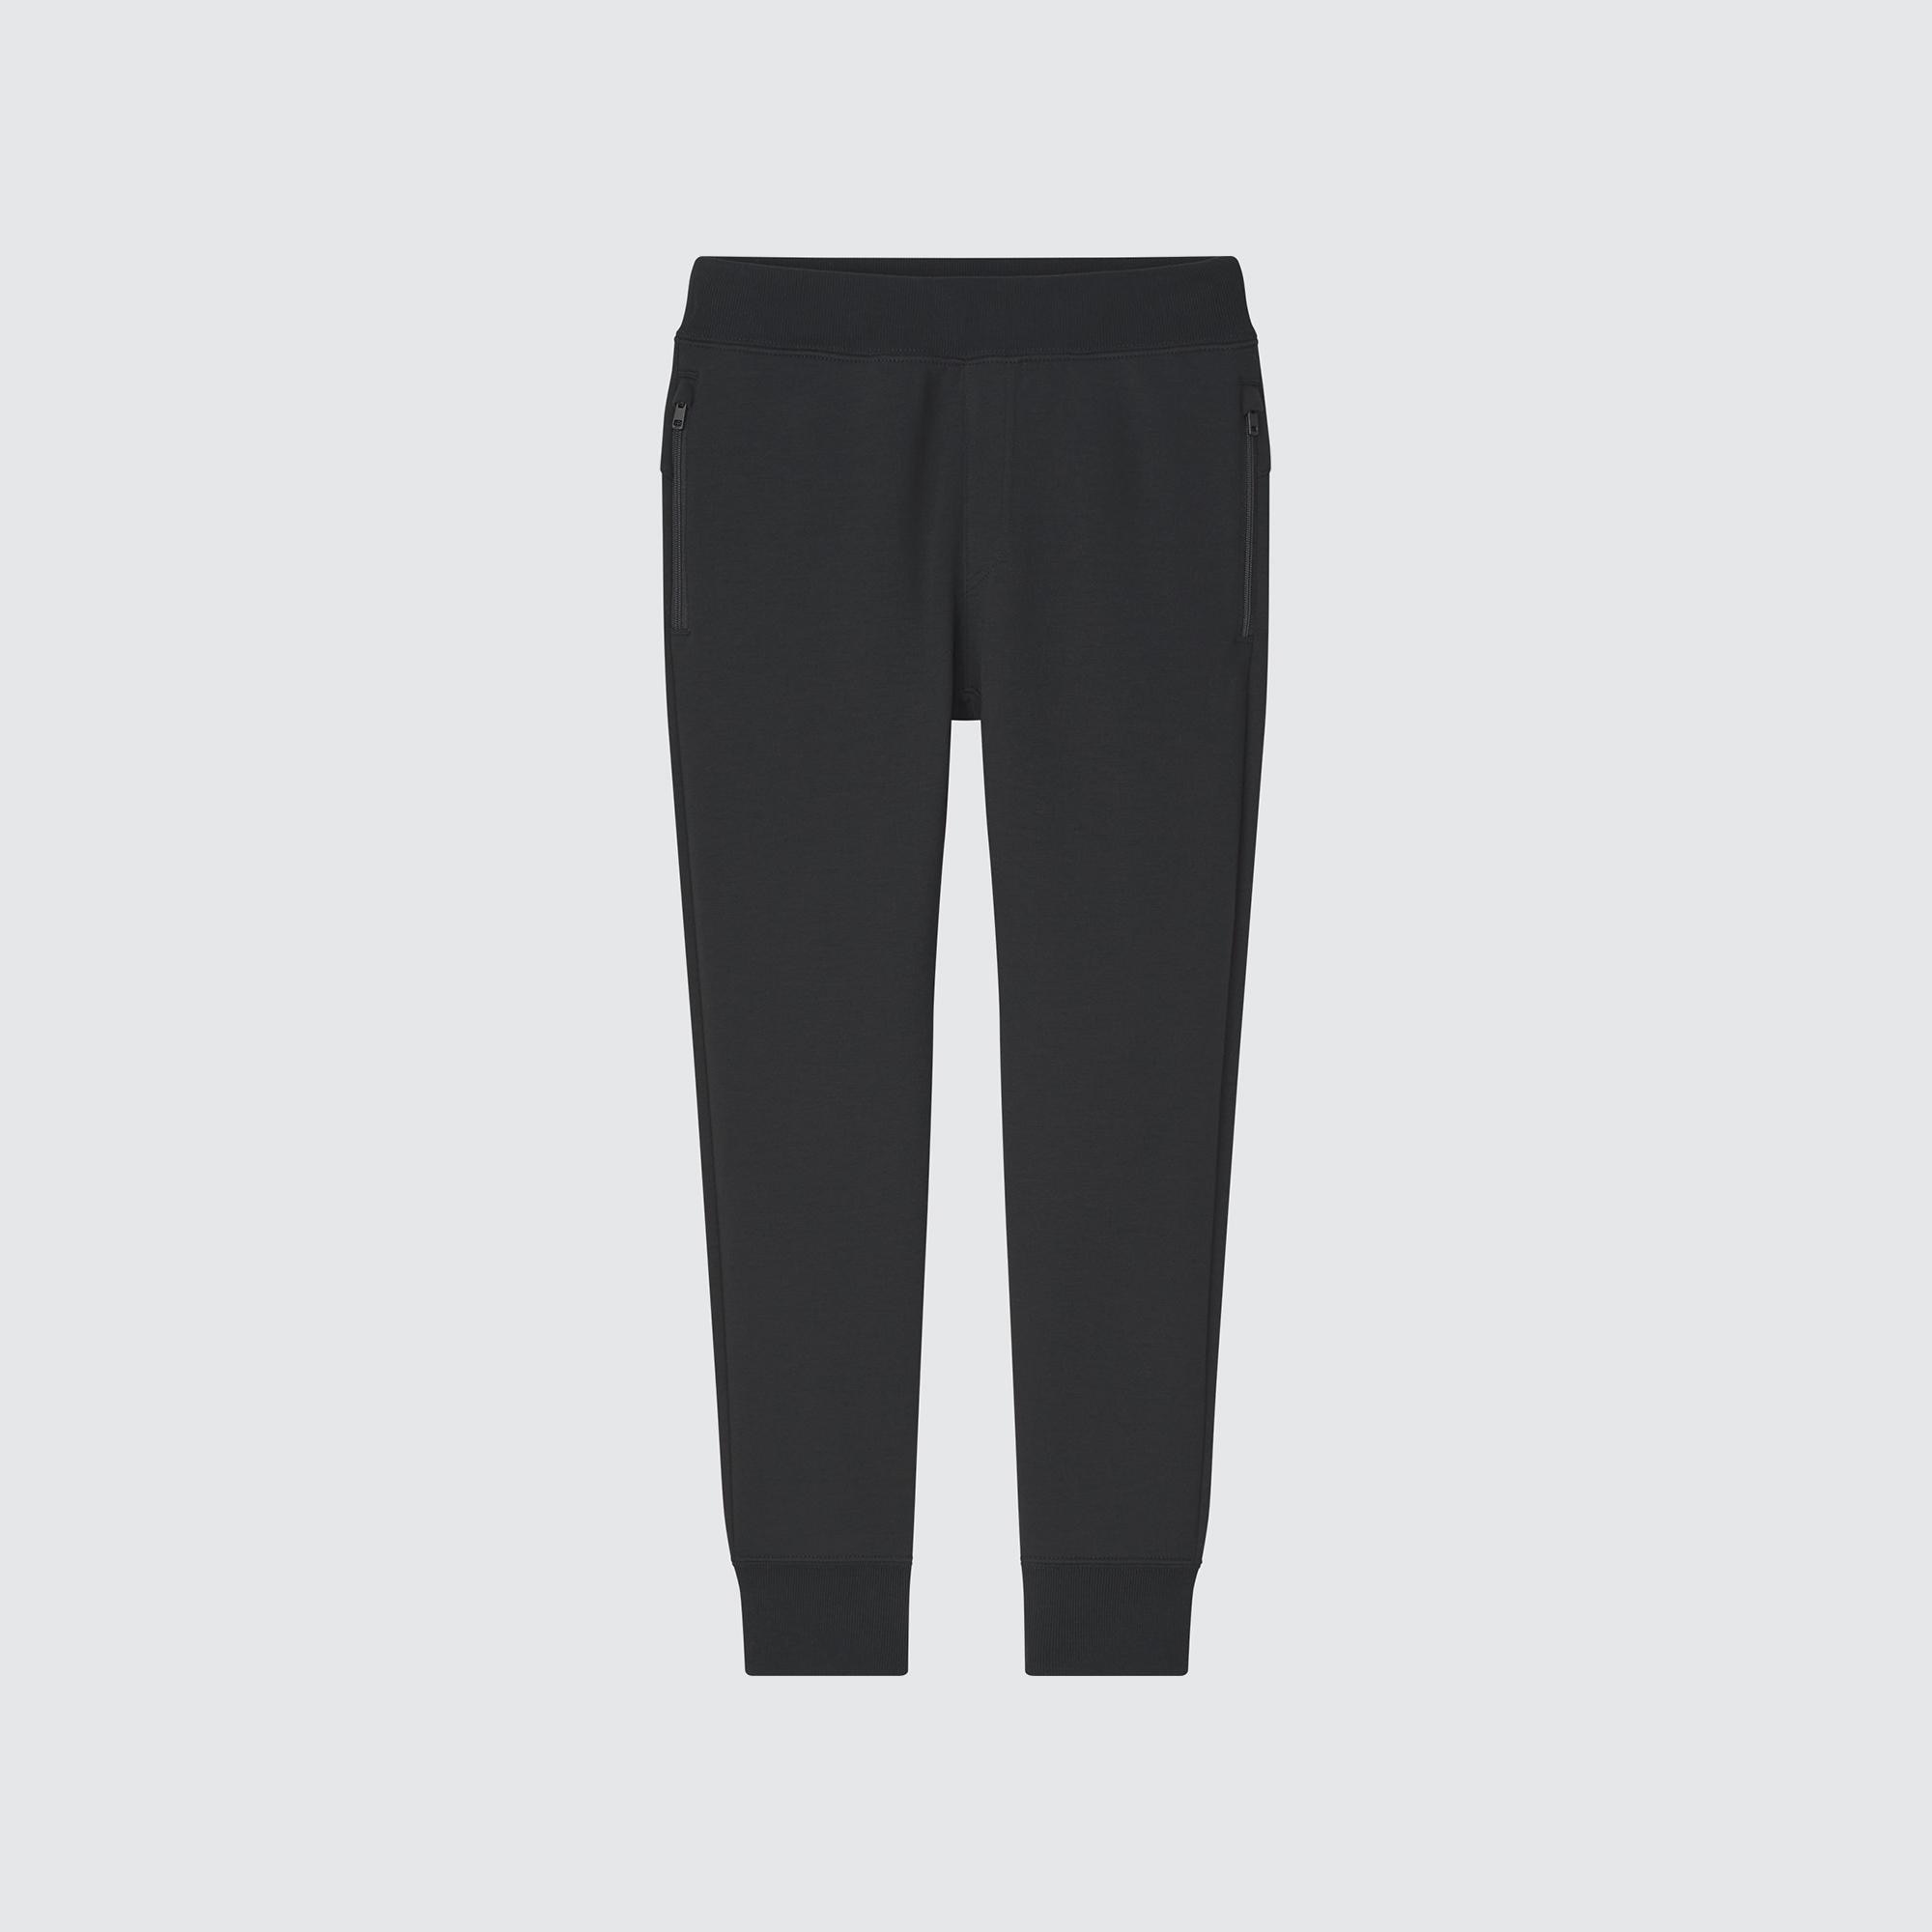 Reviews for Ultra Stretch Dry Sweatpants